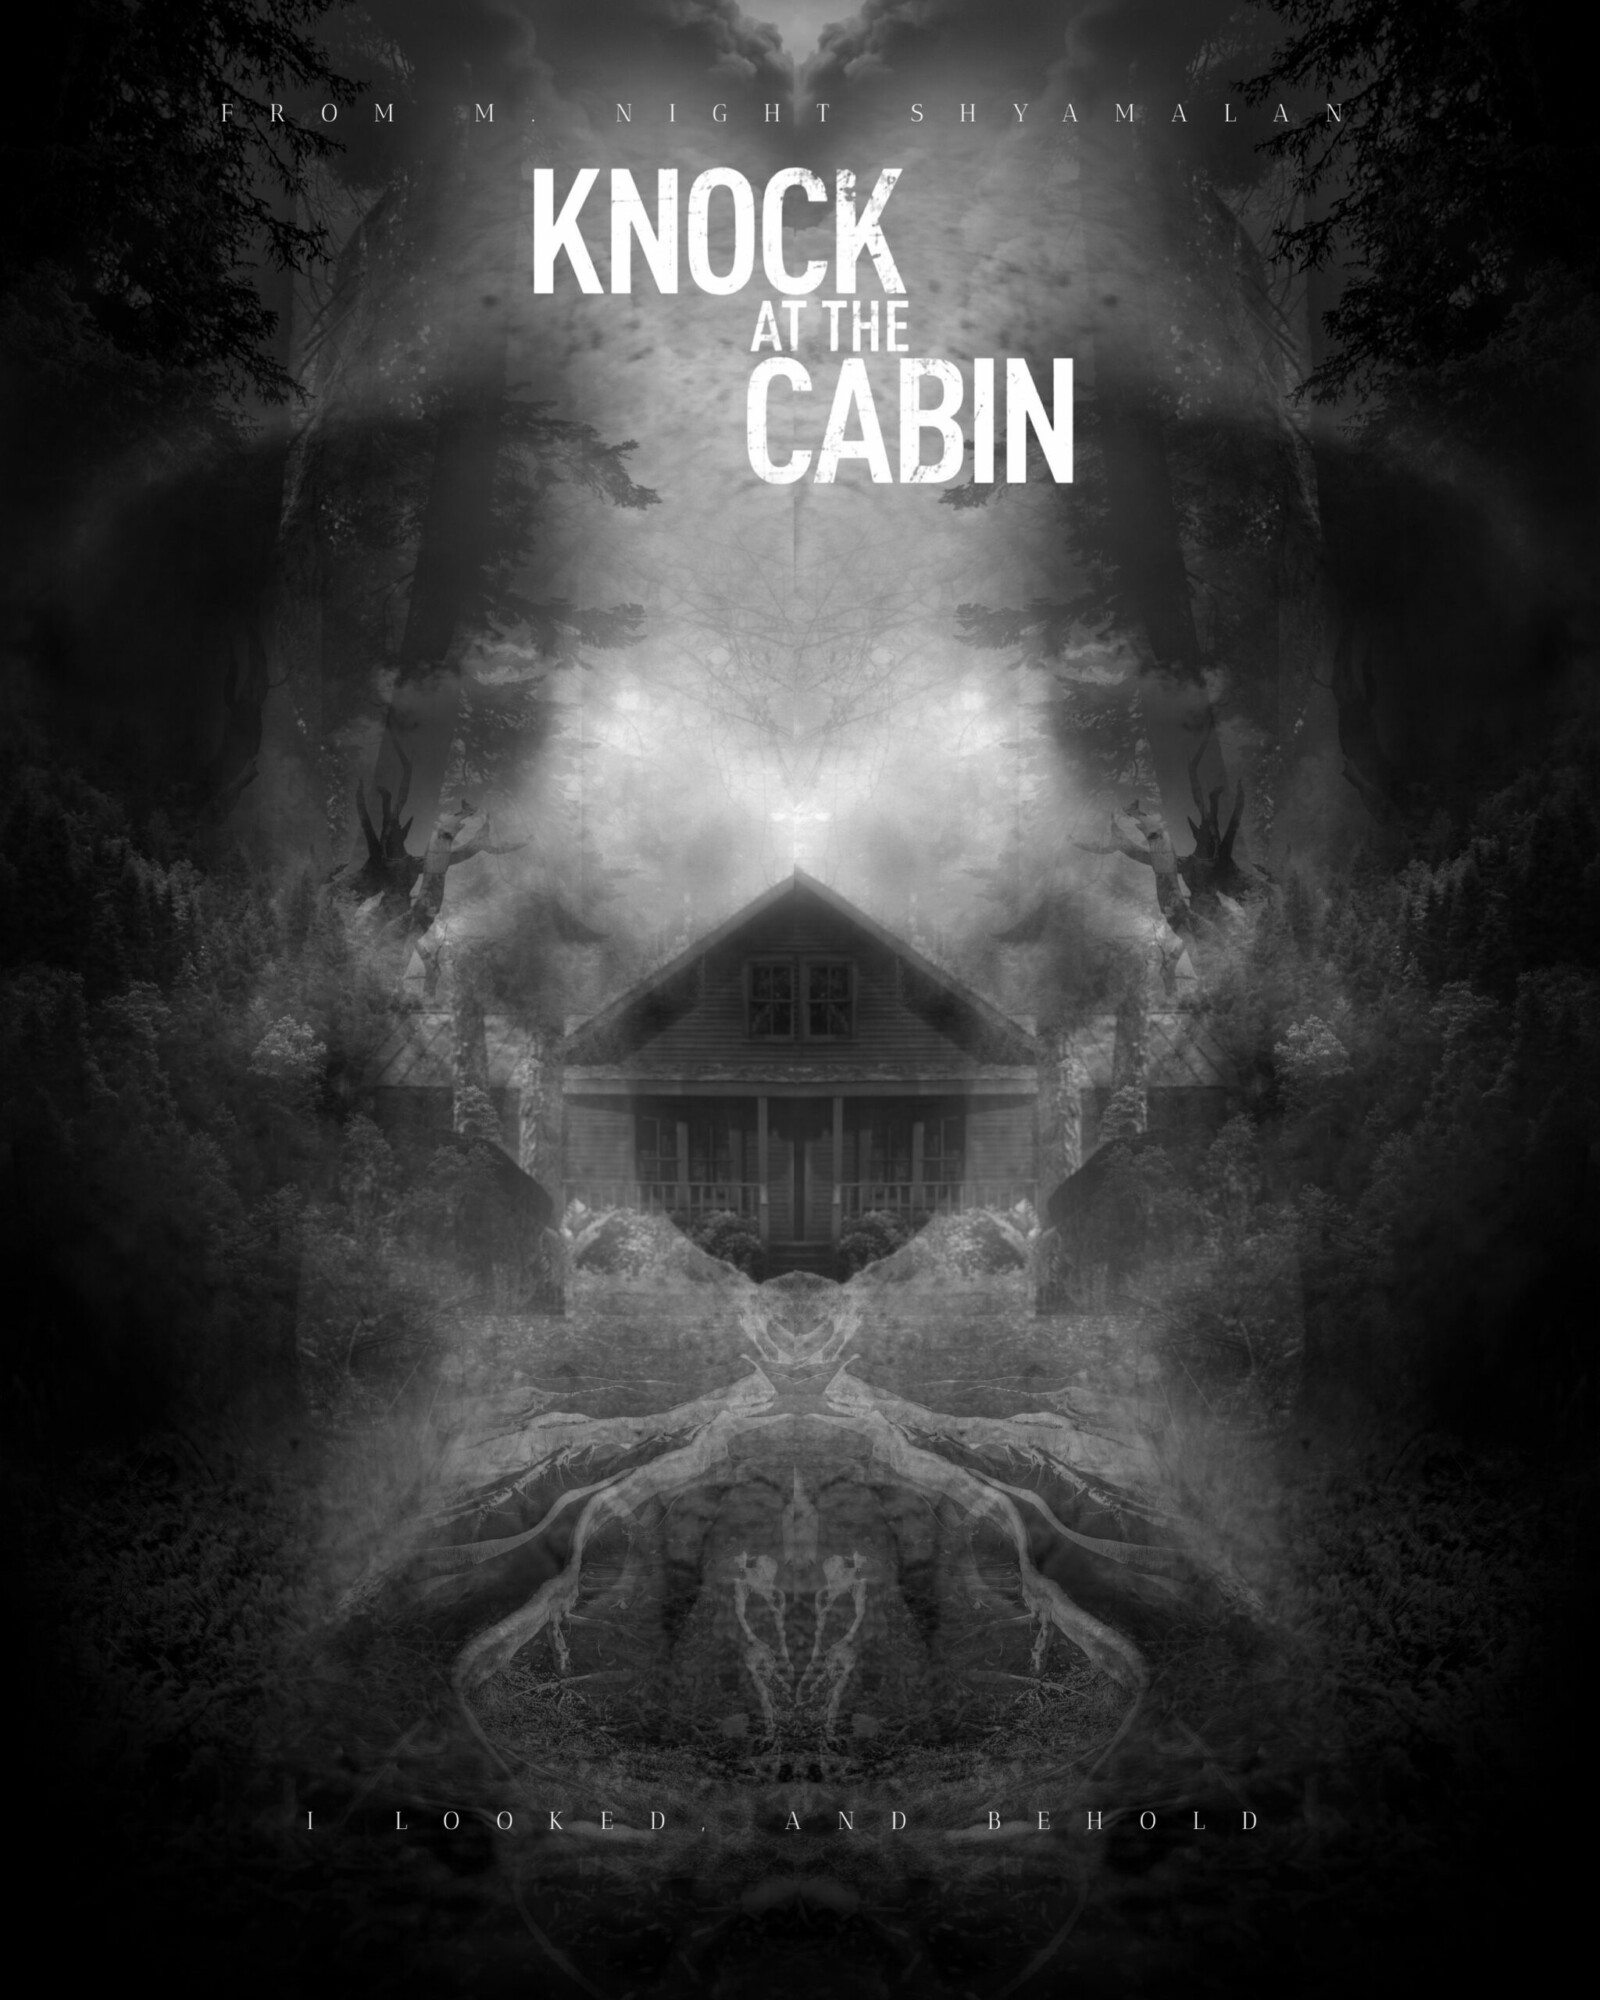 Knock at the cabin